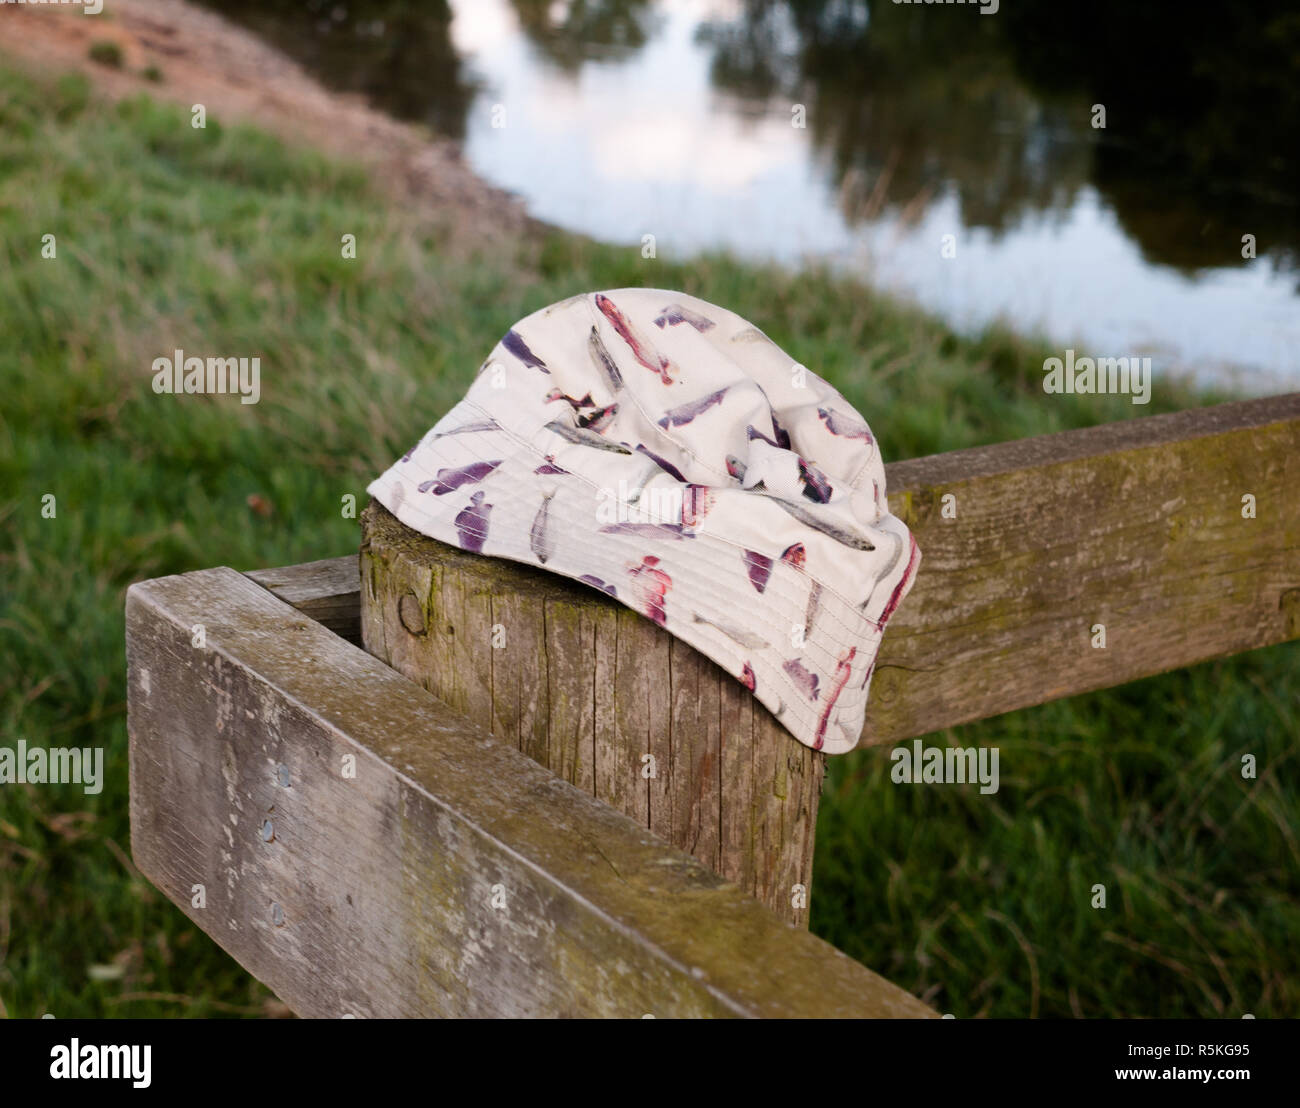 a bucket hat placed on a wooden post Stock Photo